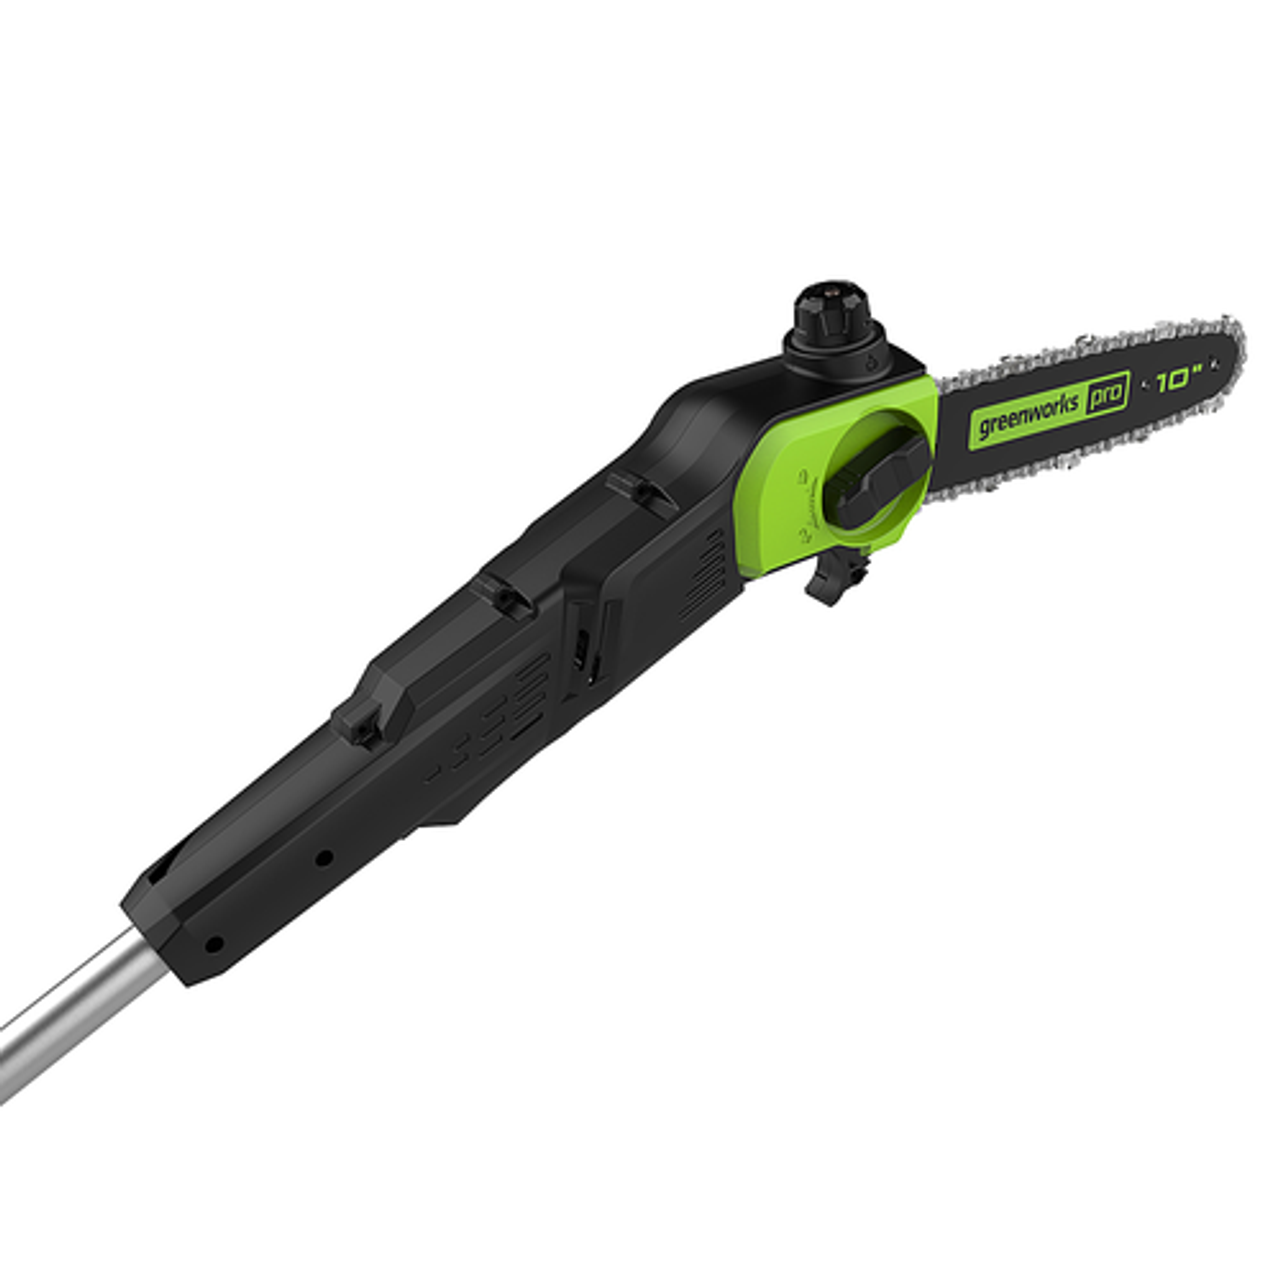 Greenworks - 80V 10” Brushless Cordless Pole Saw (Battery & Charger Not Included) with 14.5 ft Reach - Green